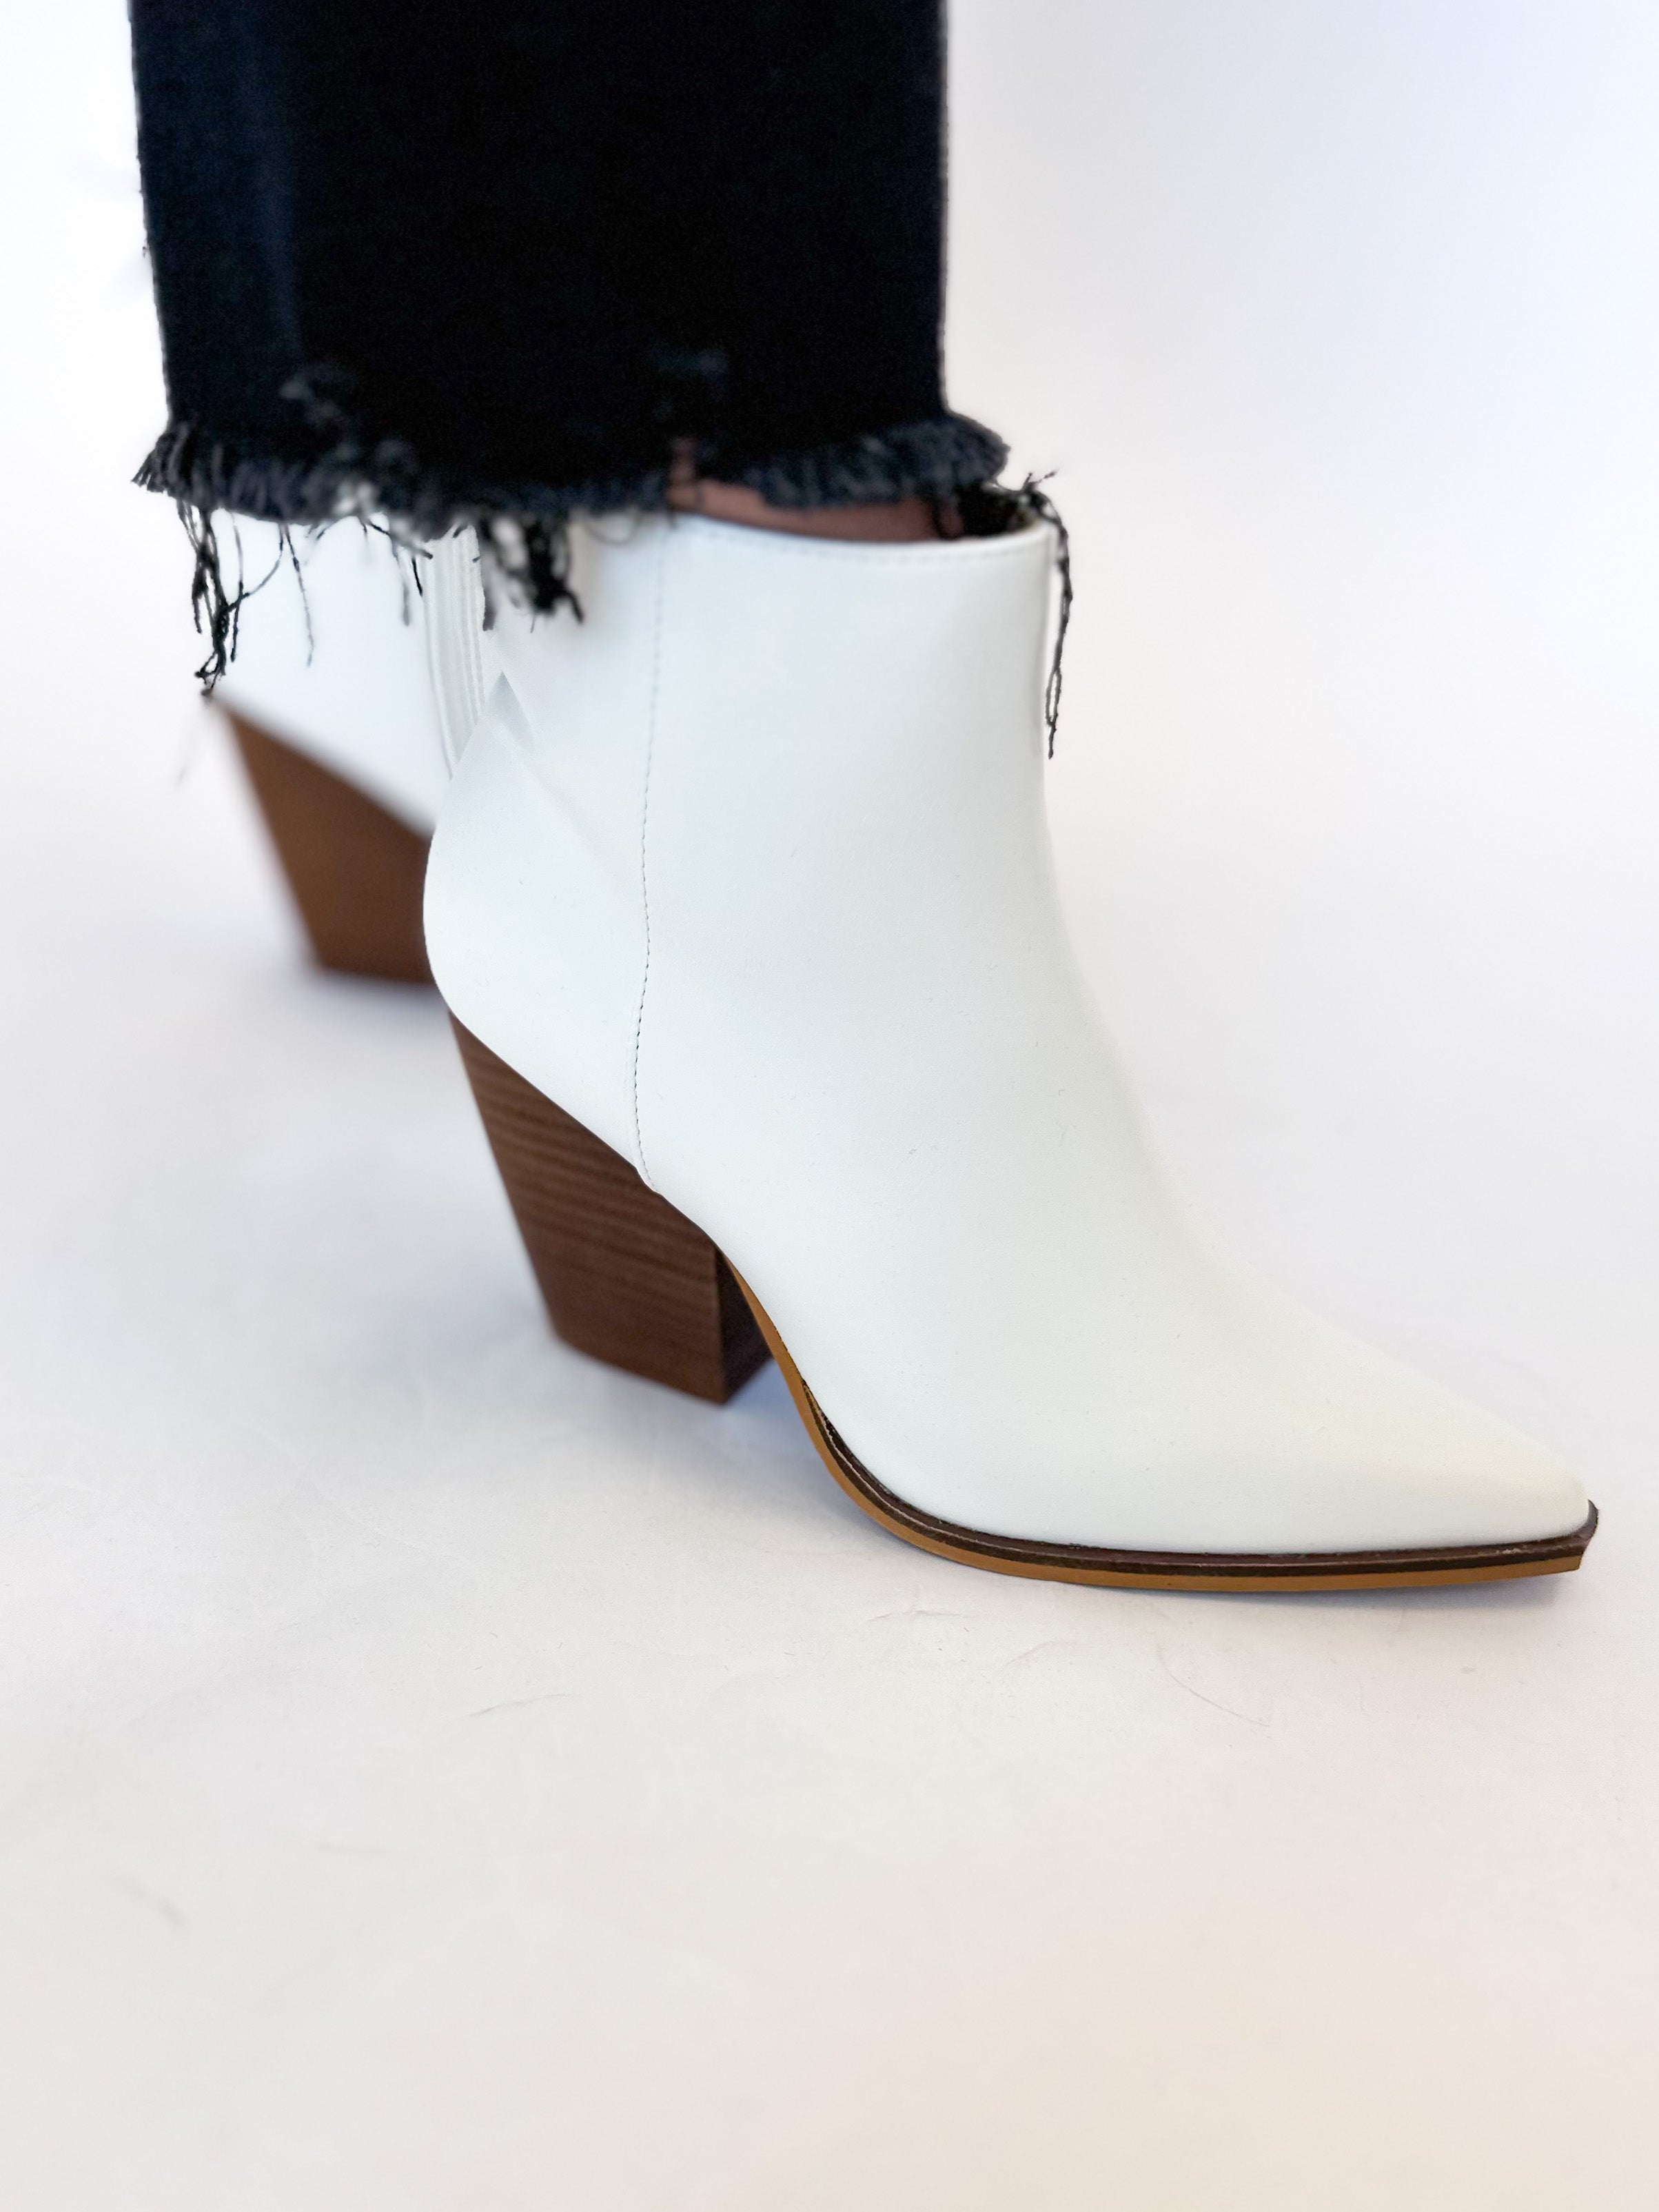 The Abigail Booties-700 Footwear-A RYDER GIRL-July & June Women's Fashion Boutique Located in San Antonio, Texas